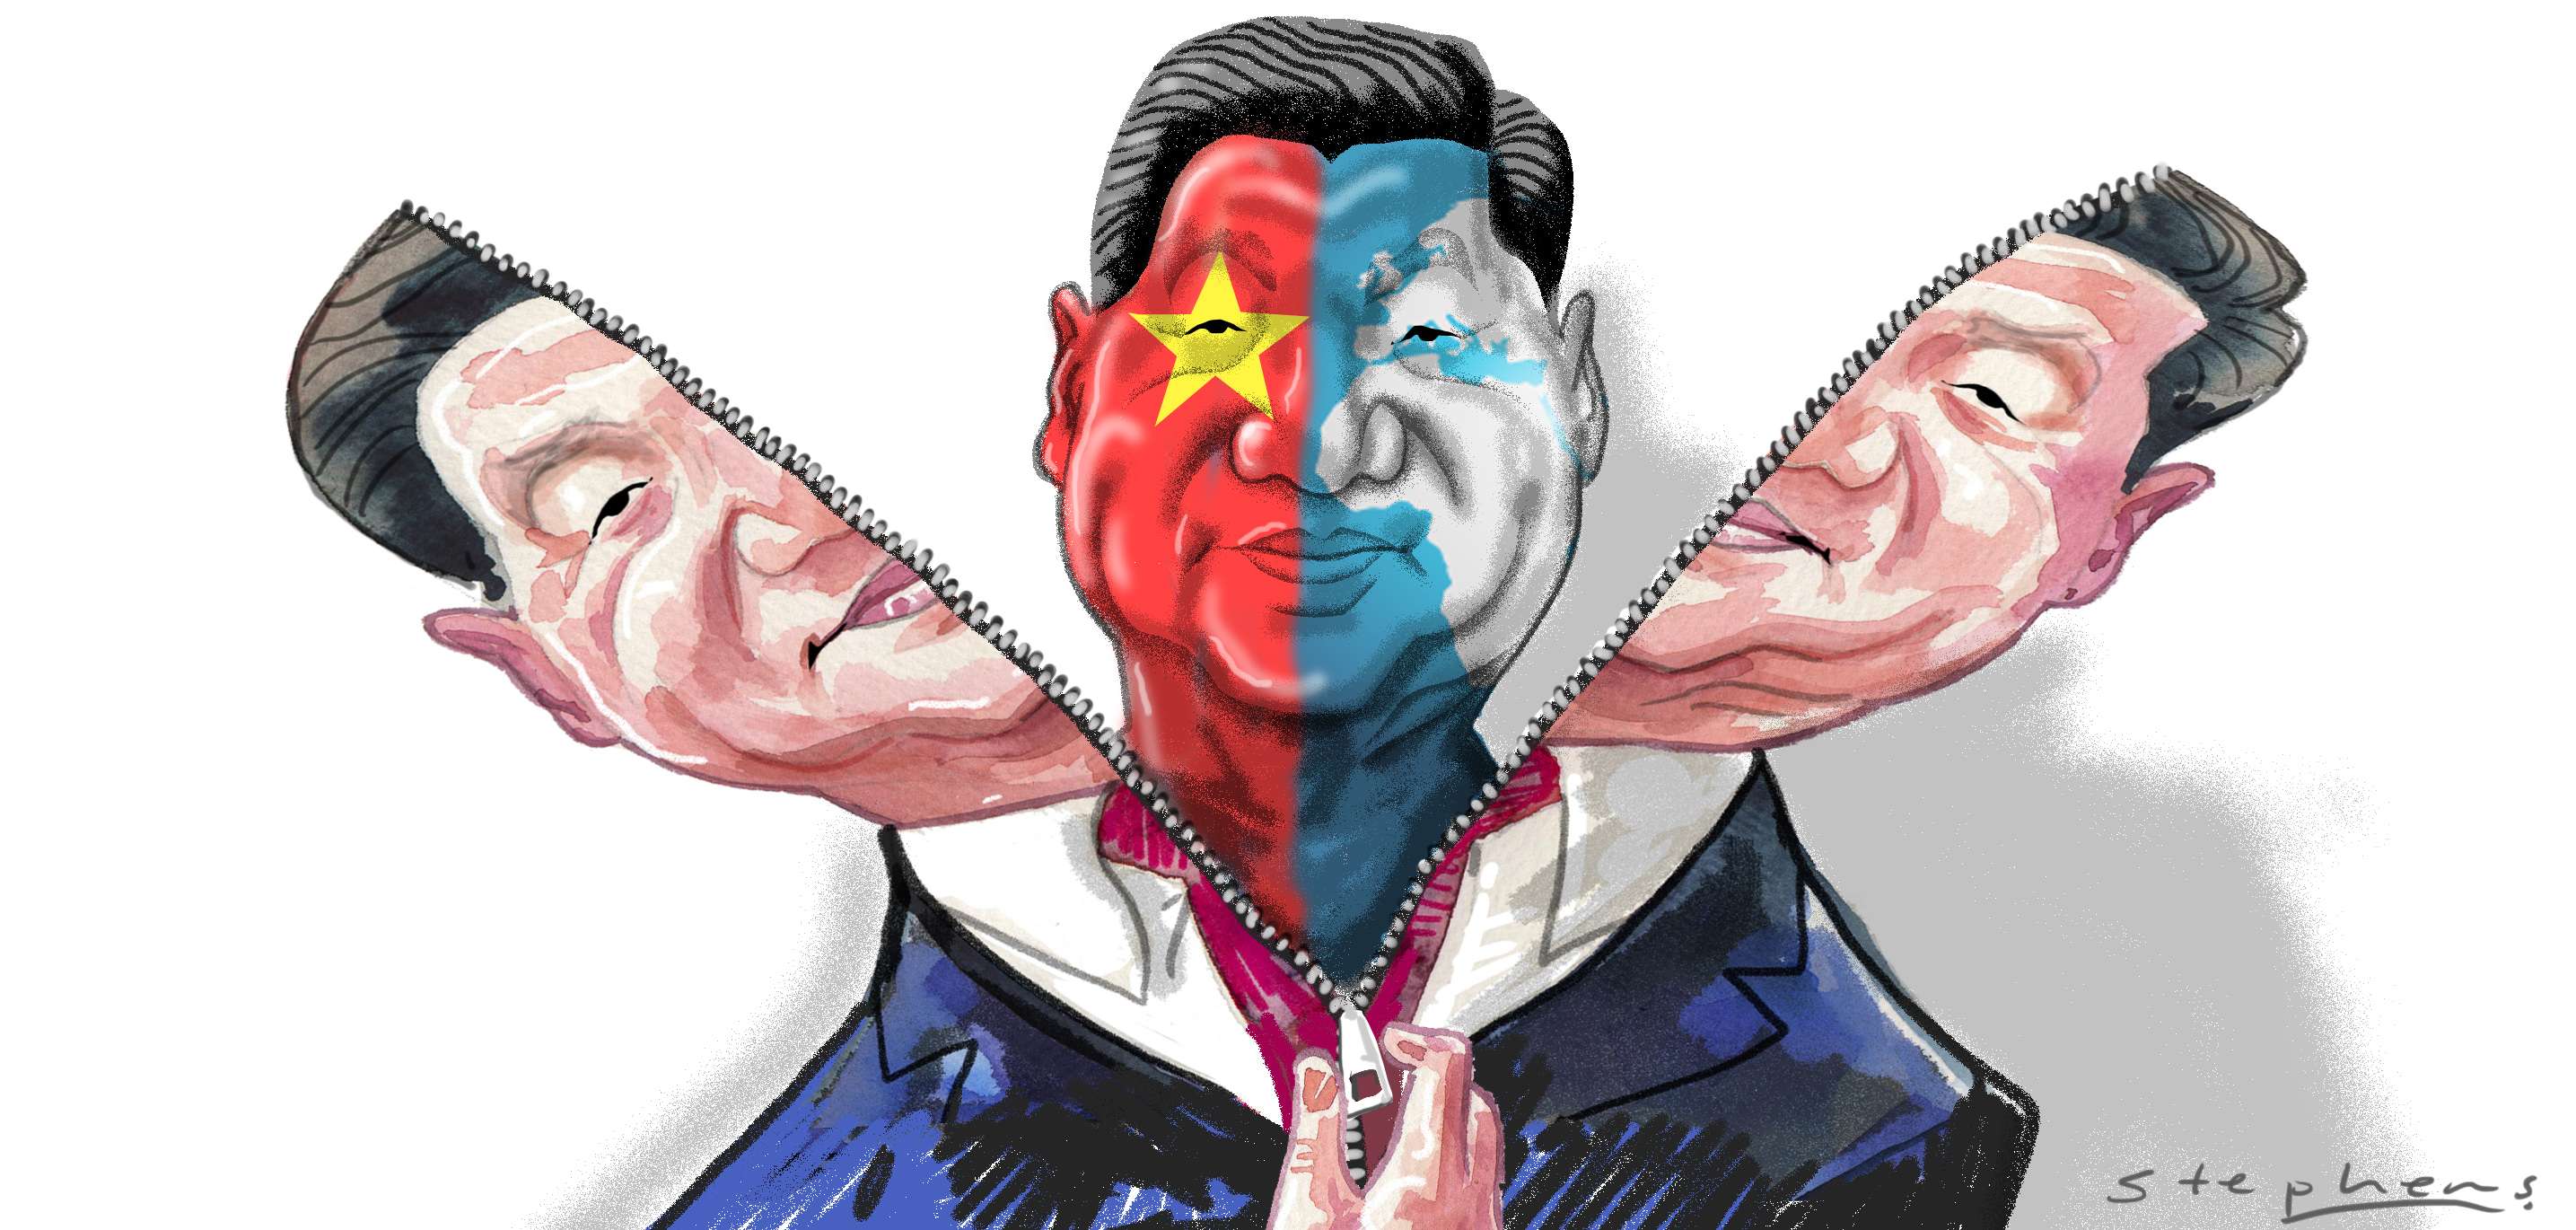 China is deploying its soft power internationally to maximise Xi Jinping’s hard power at home and abroad. Illustration: Craig Stephens